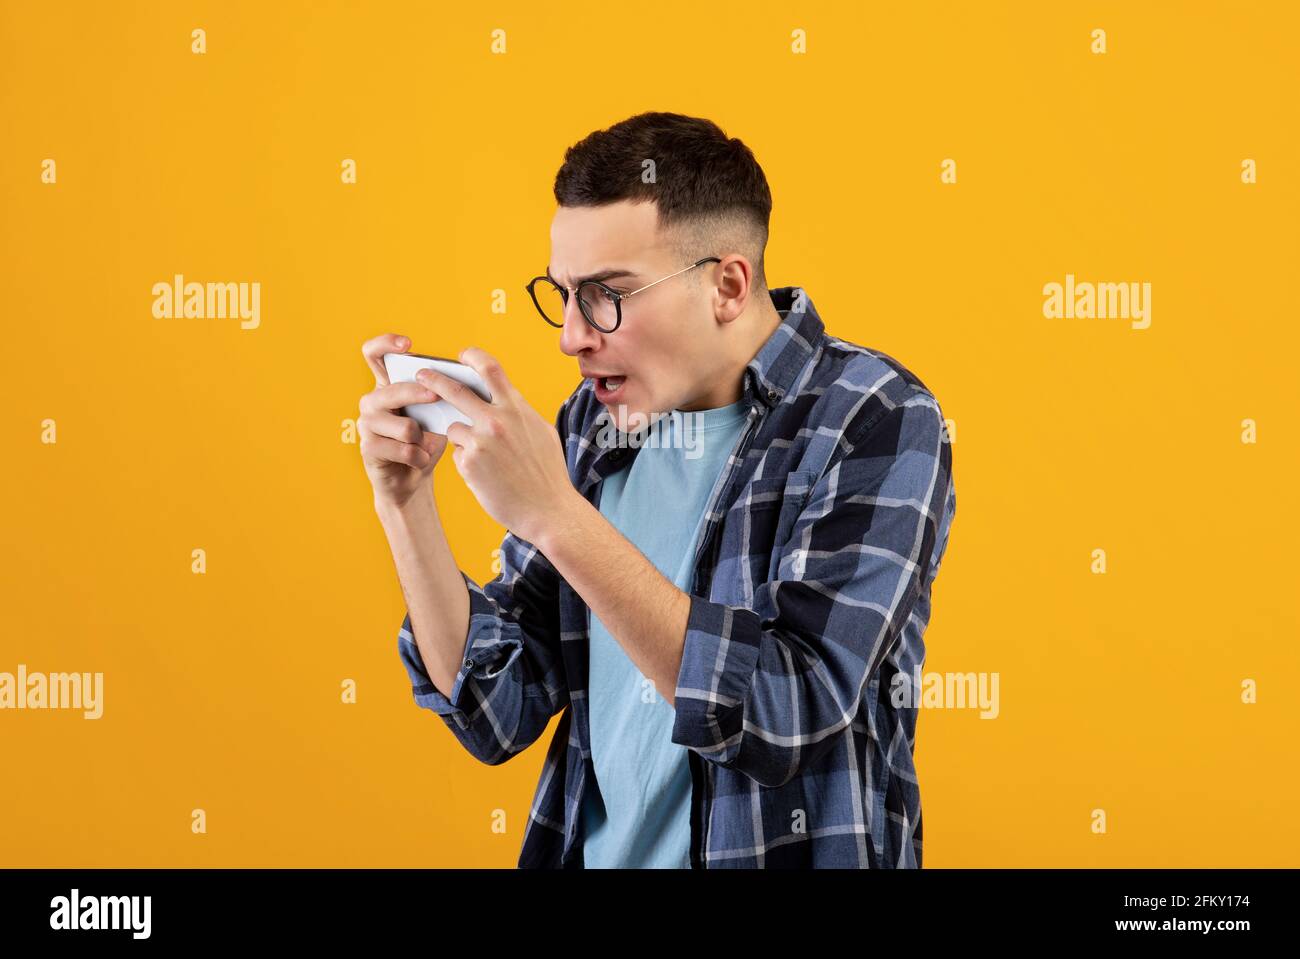 Online gaming. Addicted young guy playing video games on cellphone, overusing his gadget on orange studio background Stock Photo